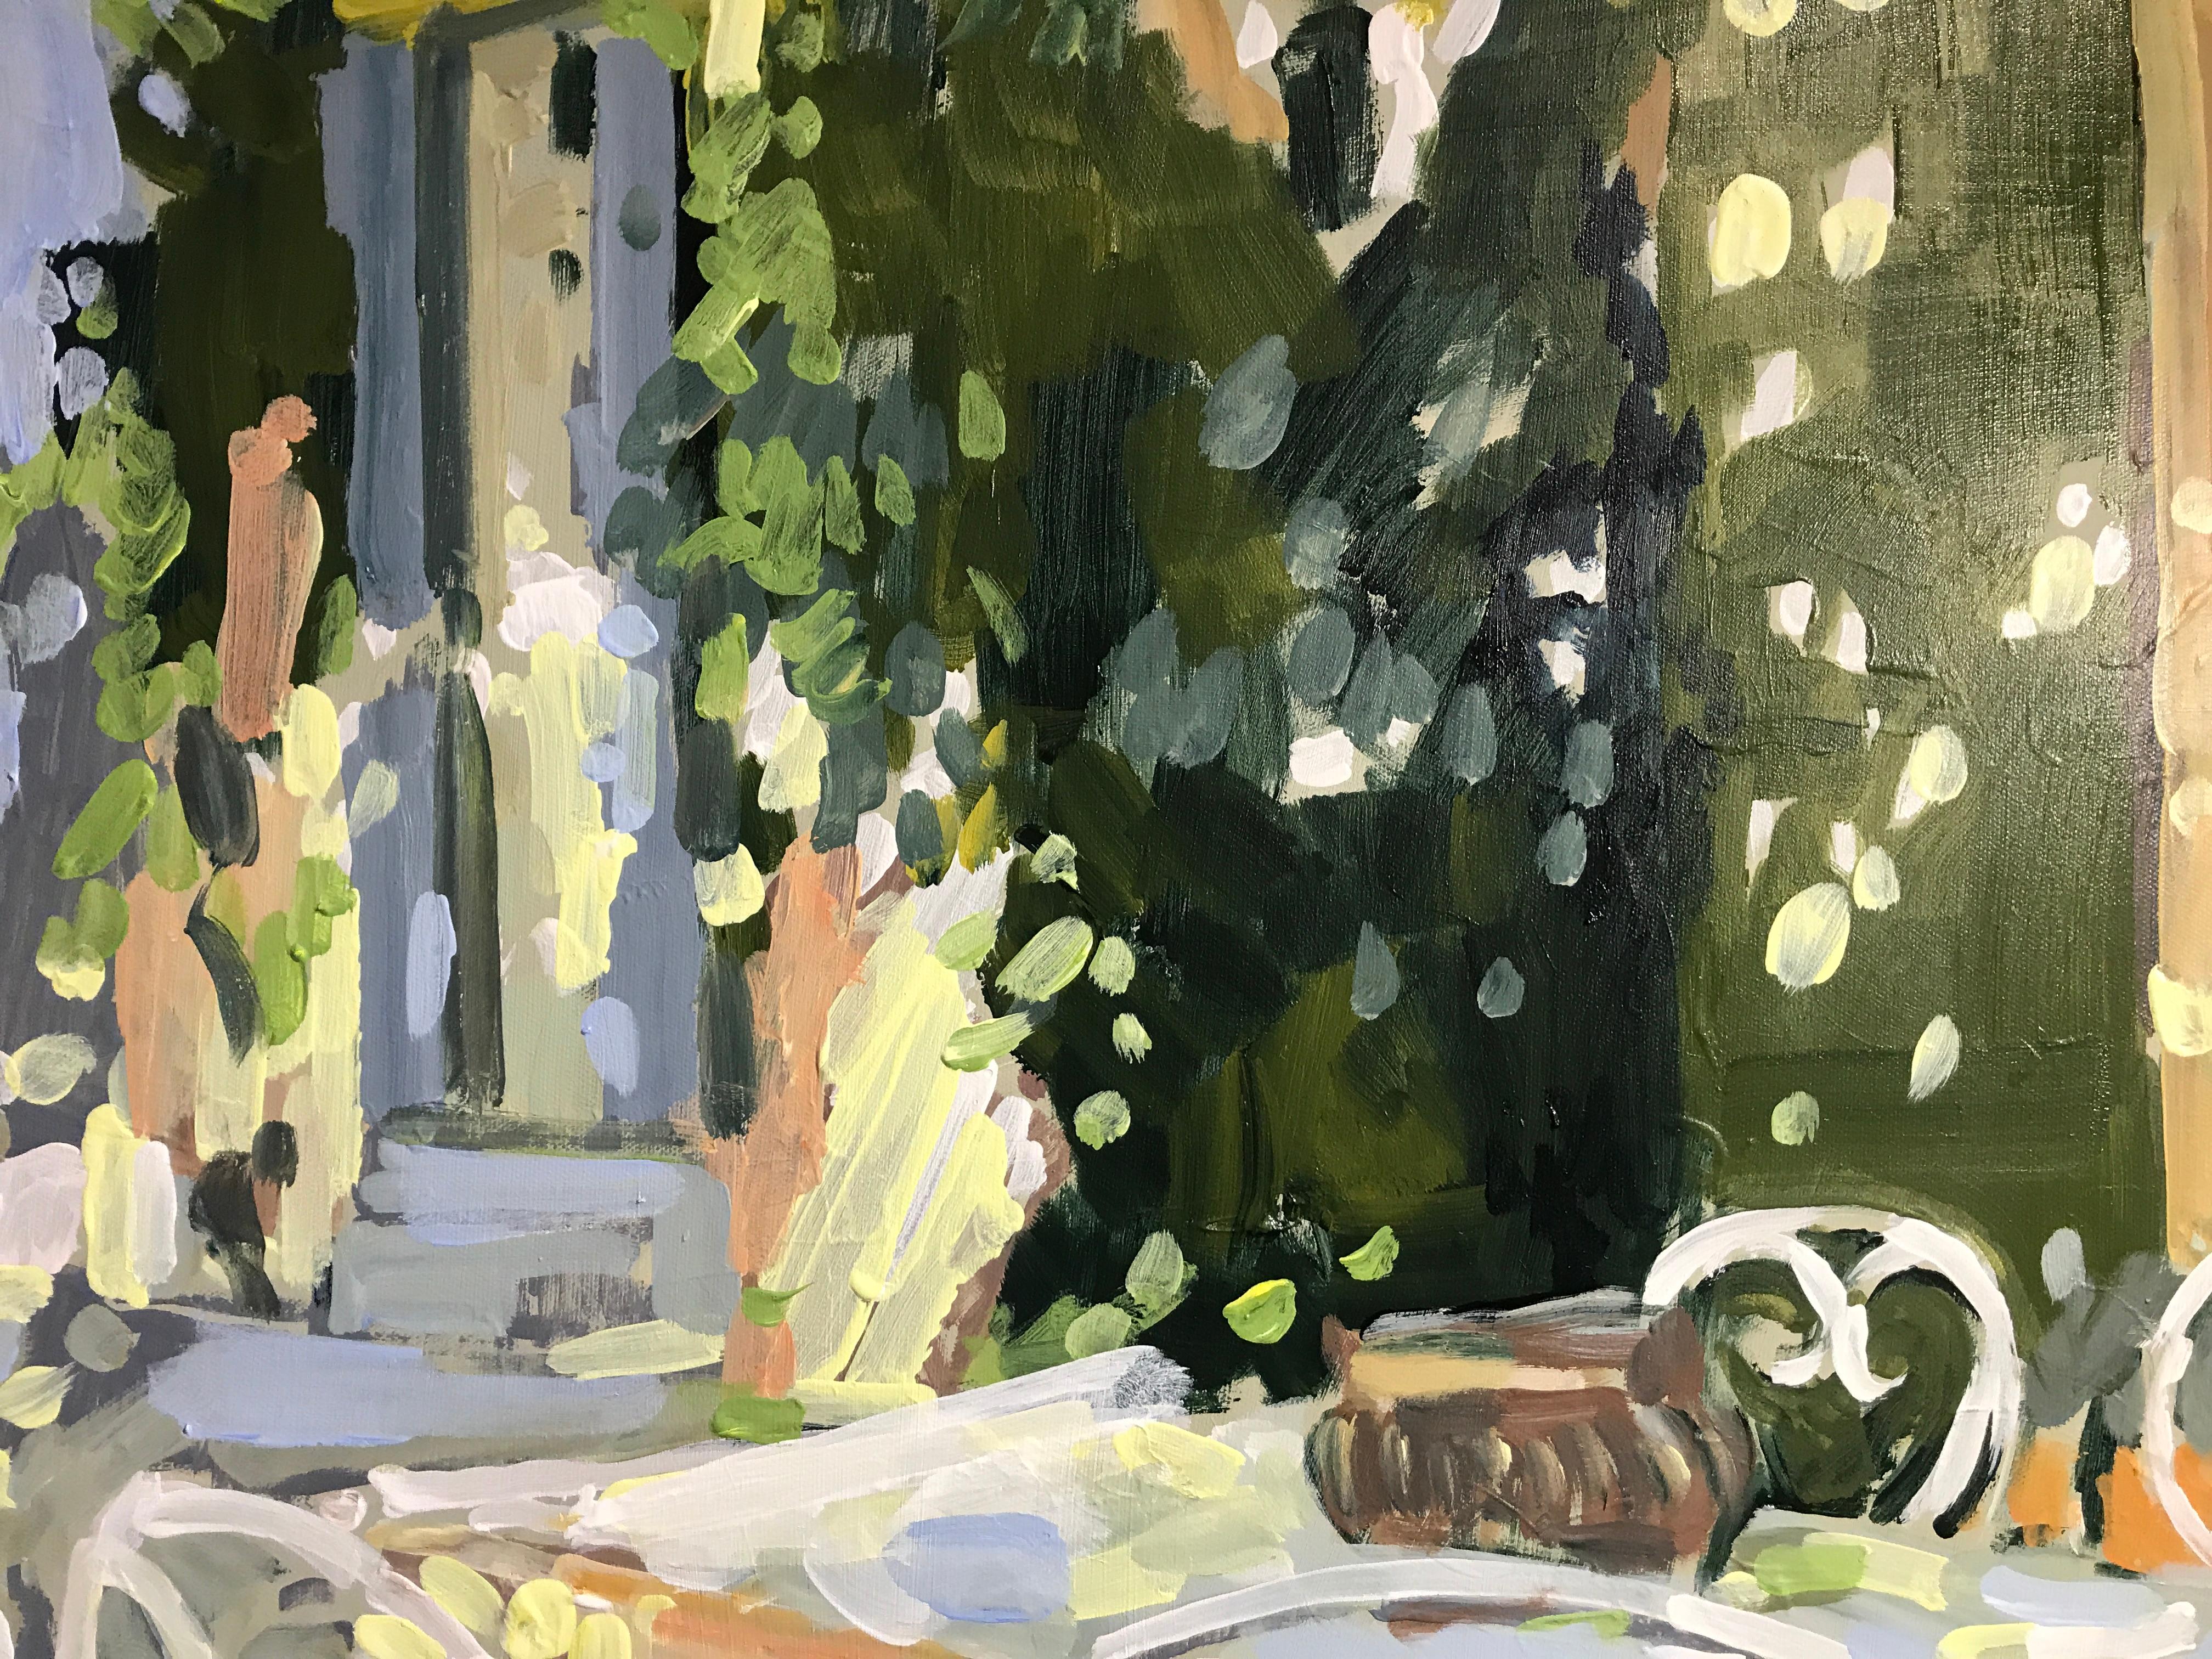 'Eating Outdoors' is a large Impressionist oil on canvas provençale scene created by American artist Laura Shubert in 2018. Featuring a palette made of tonalities such as green, blue, white and yellow among other colors, the painting captures our